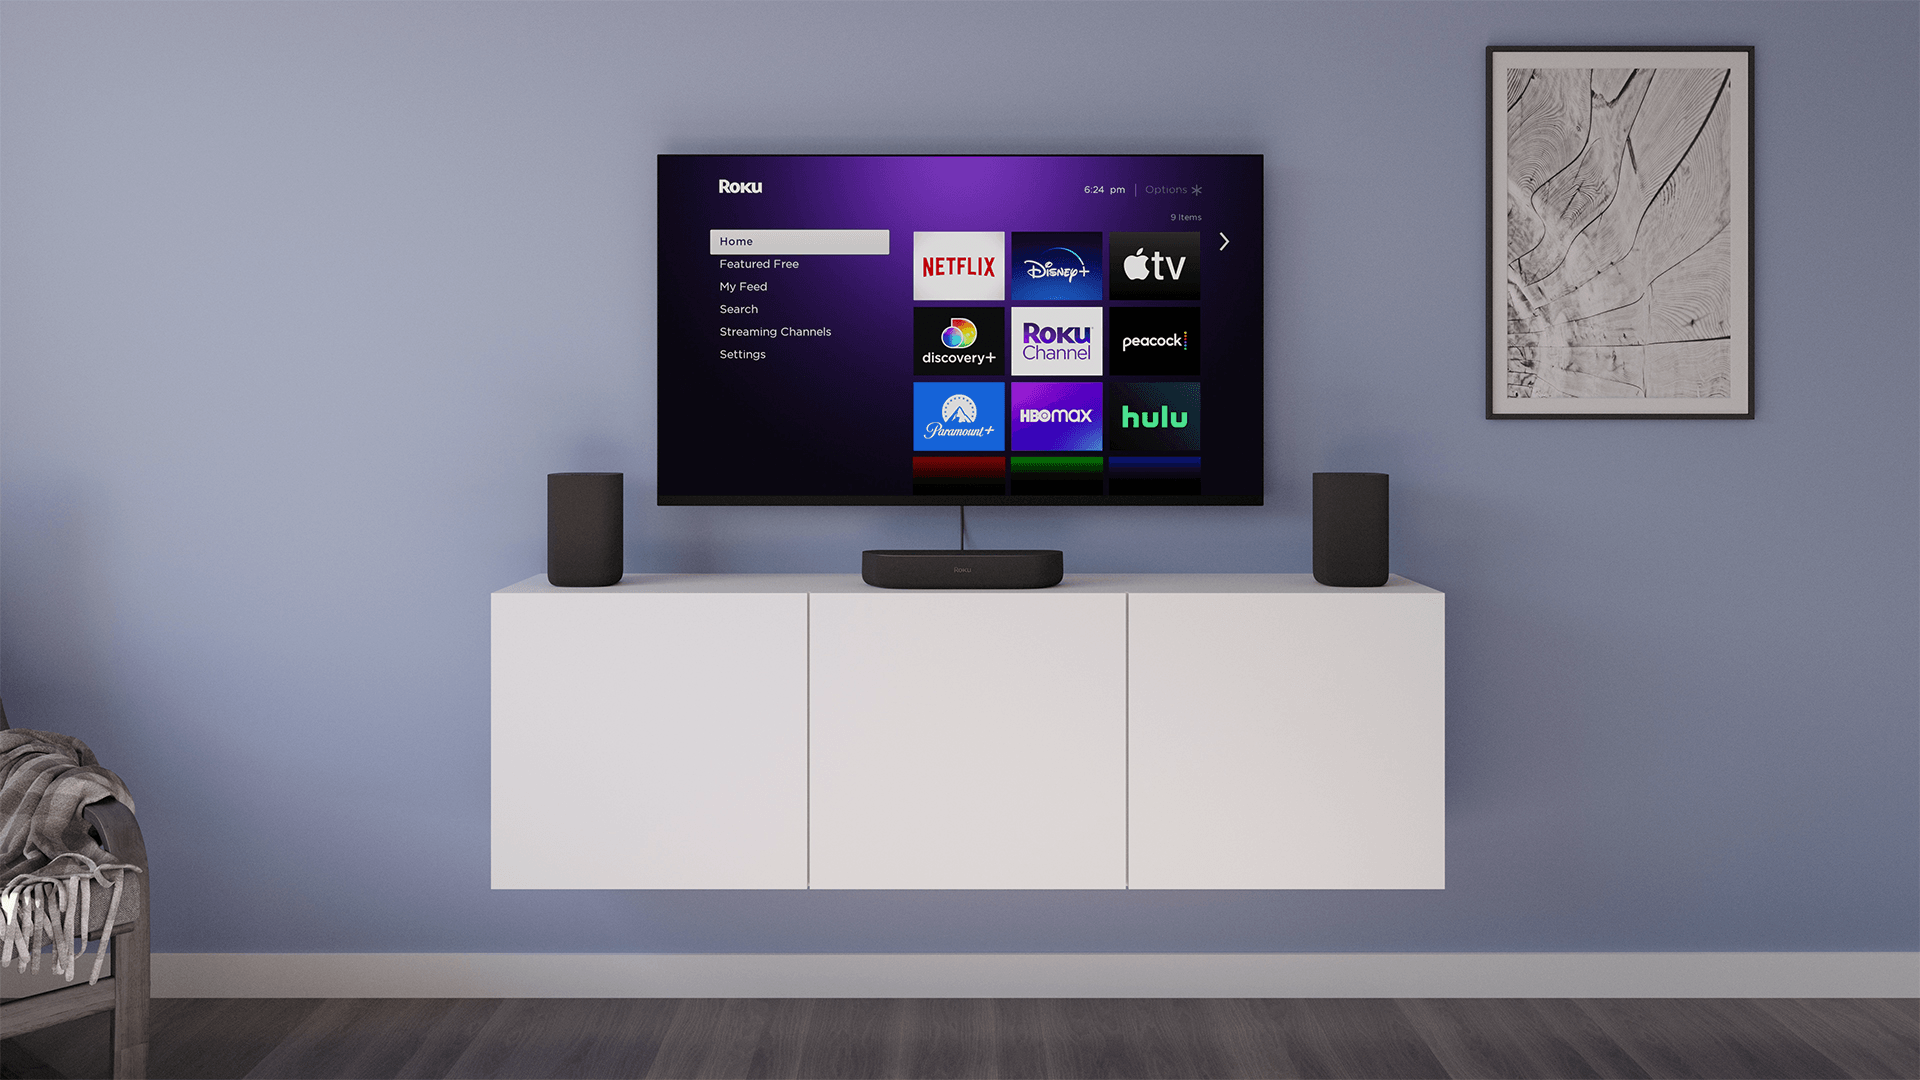 Roku Reaches 60.1 Million Active Users